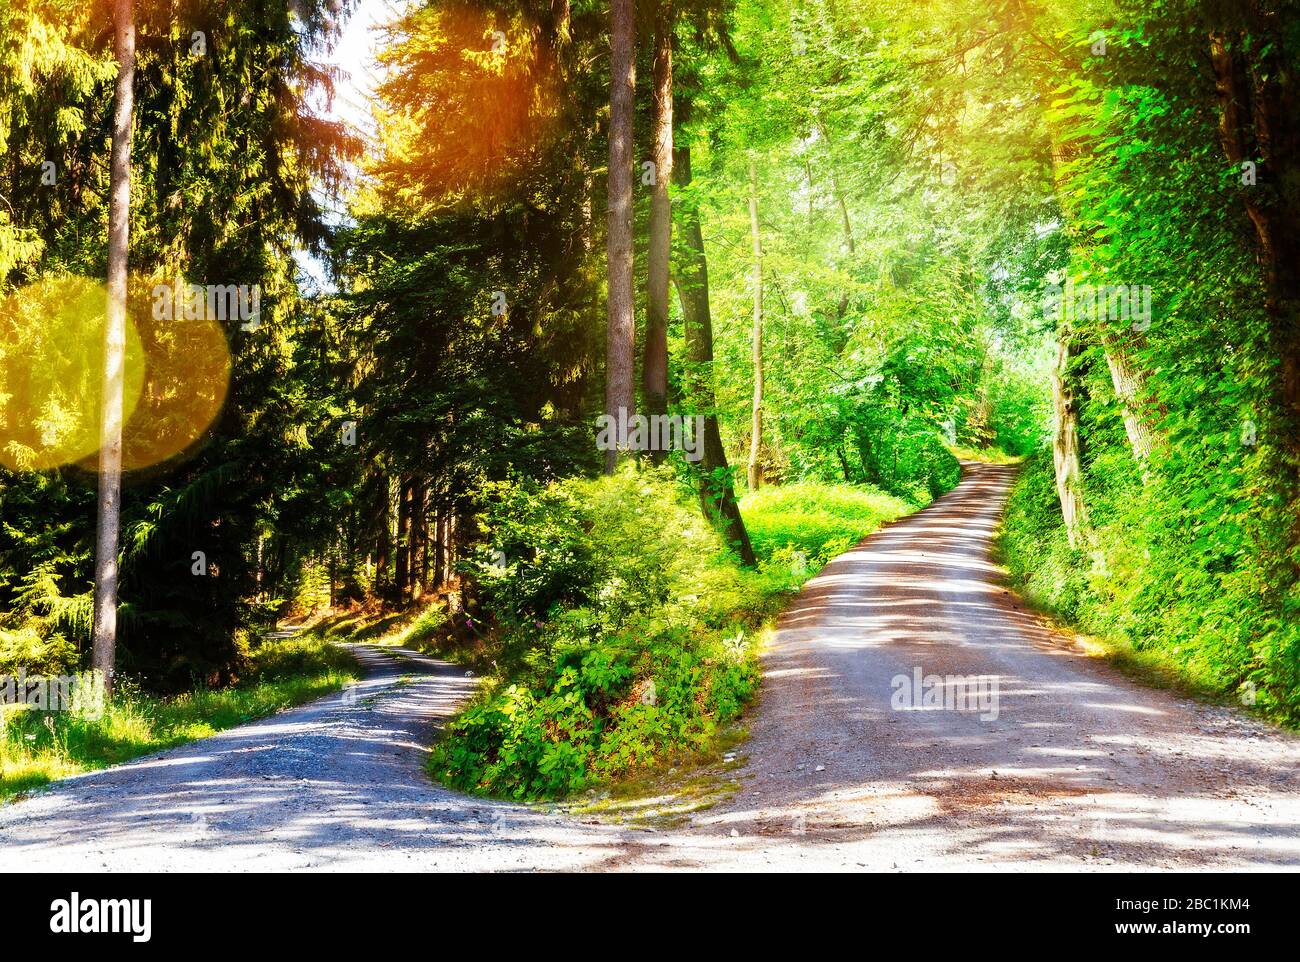 Two paths in the forest lead in different directions Stock Photo